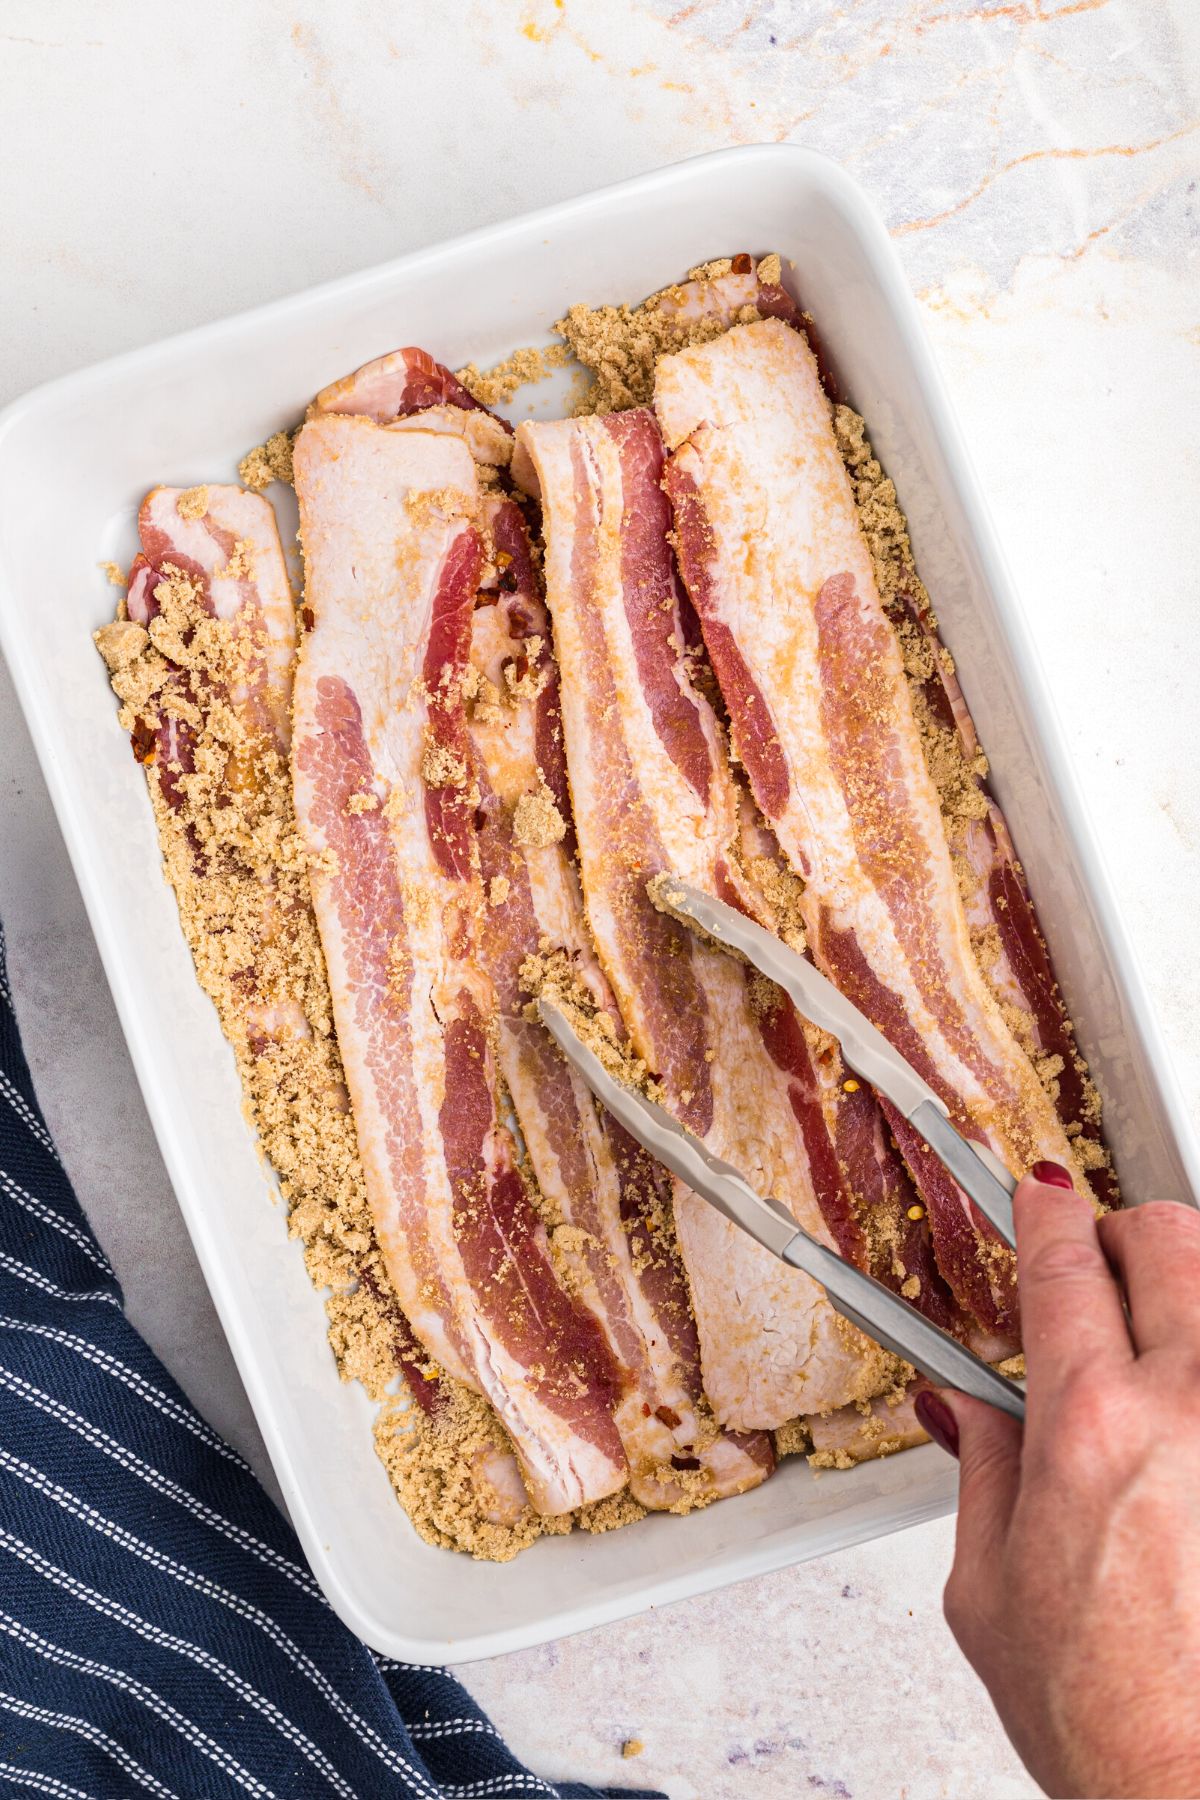 Uncooked thick bacon slices being tossed with brown sugar